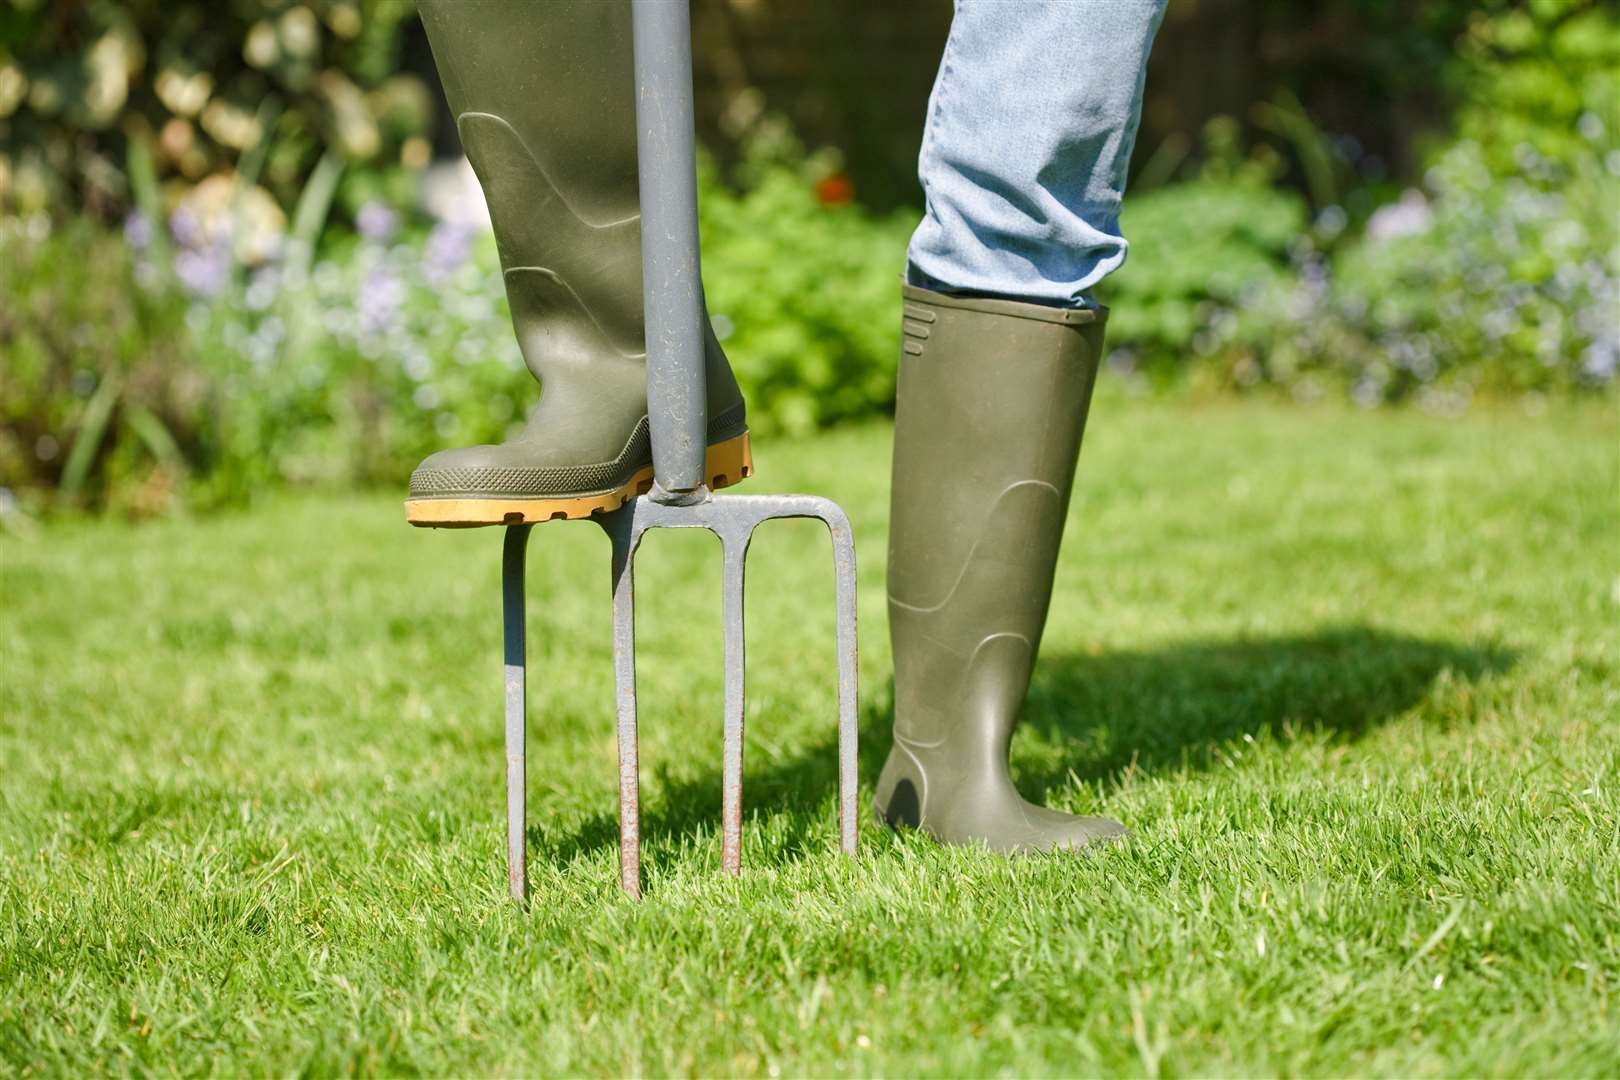 Aerate the lawn to improve drainage and compaction.